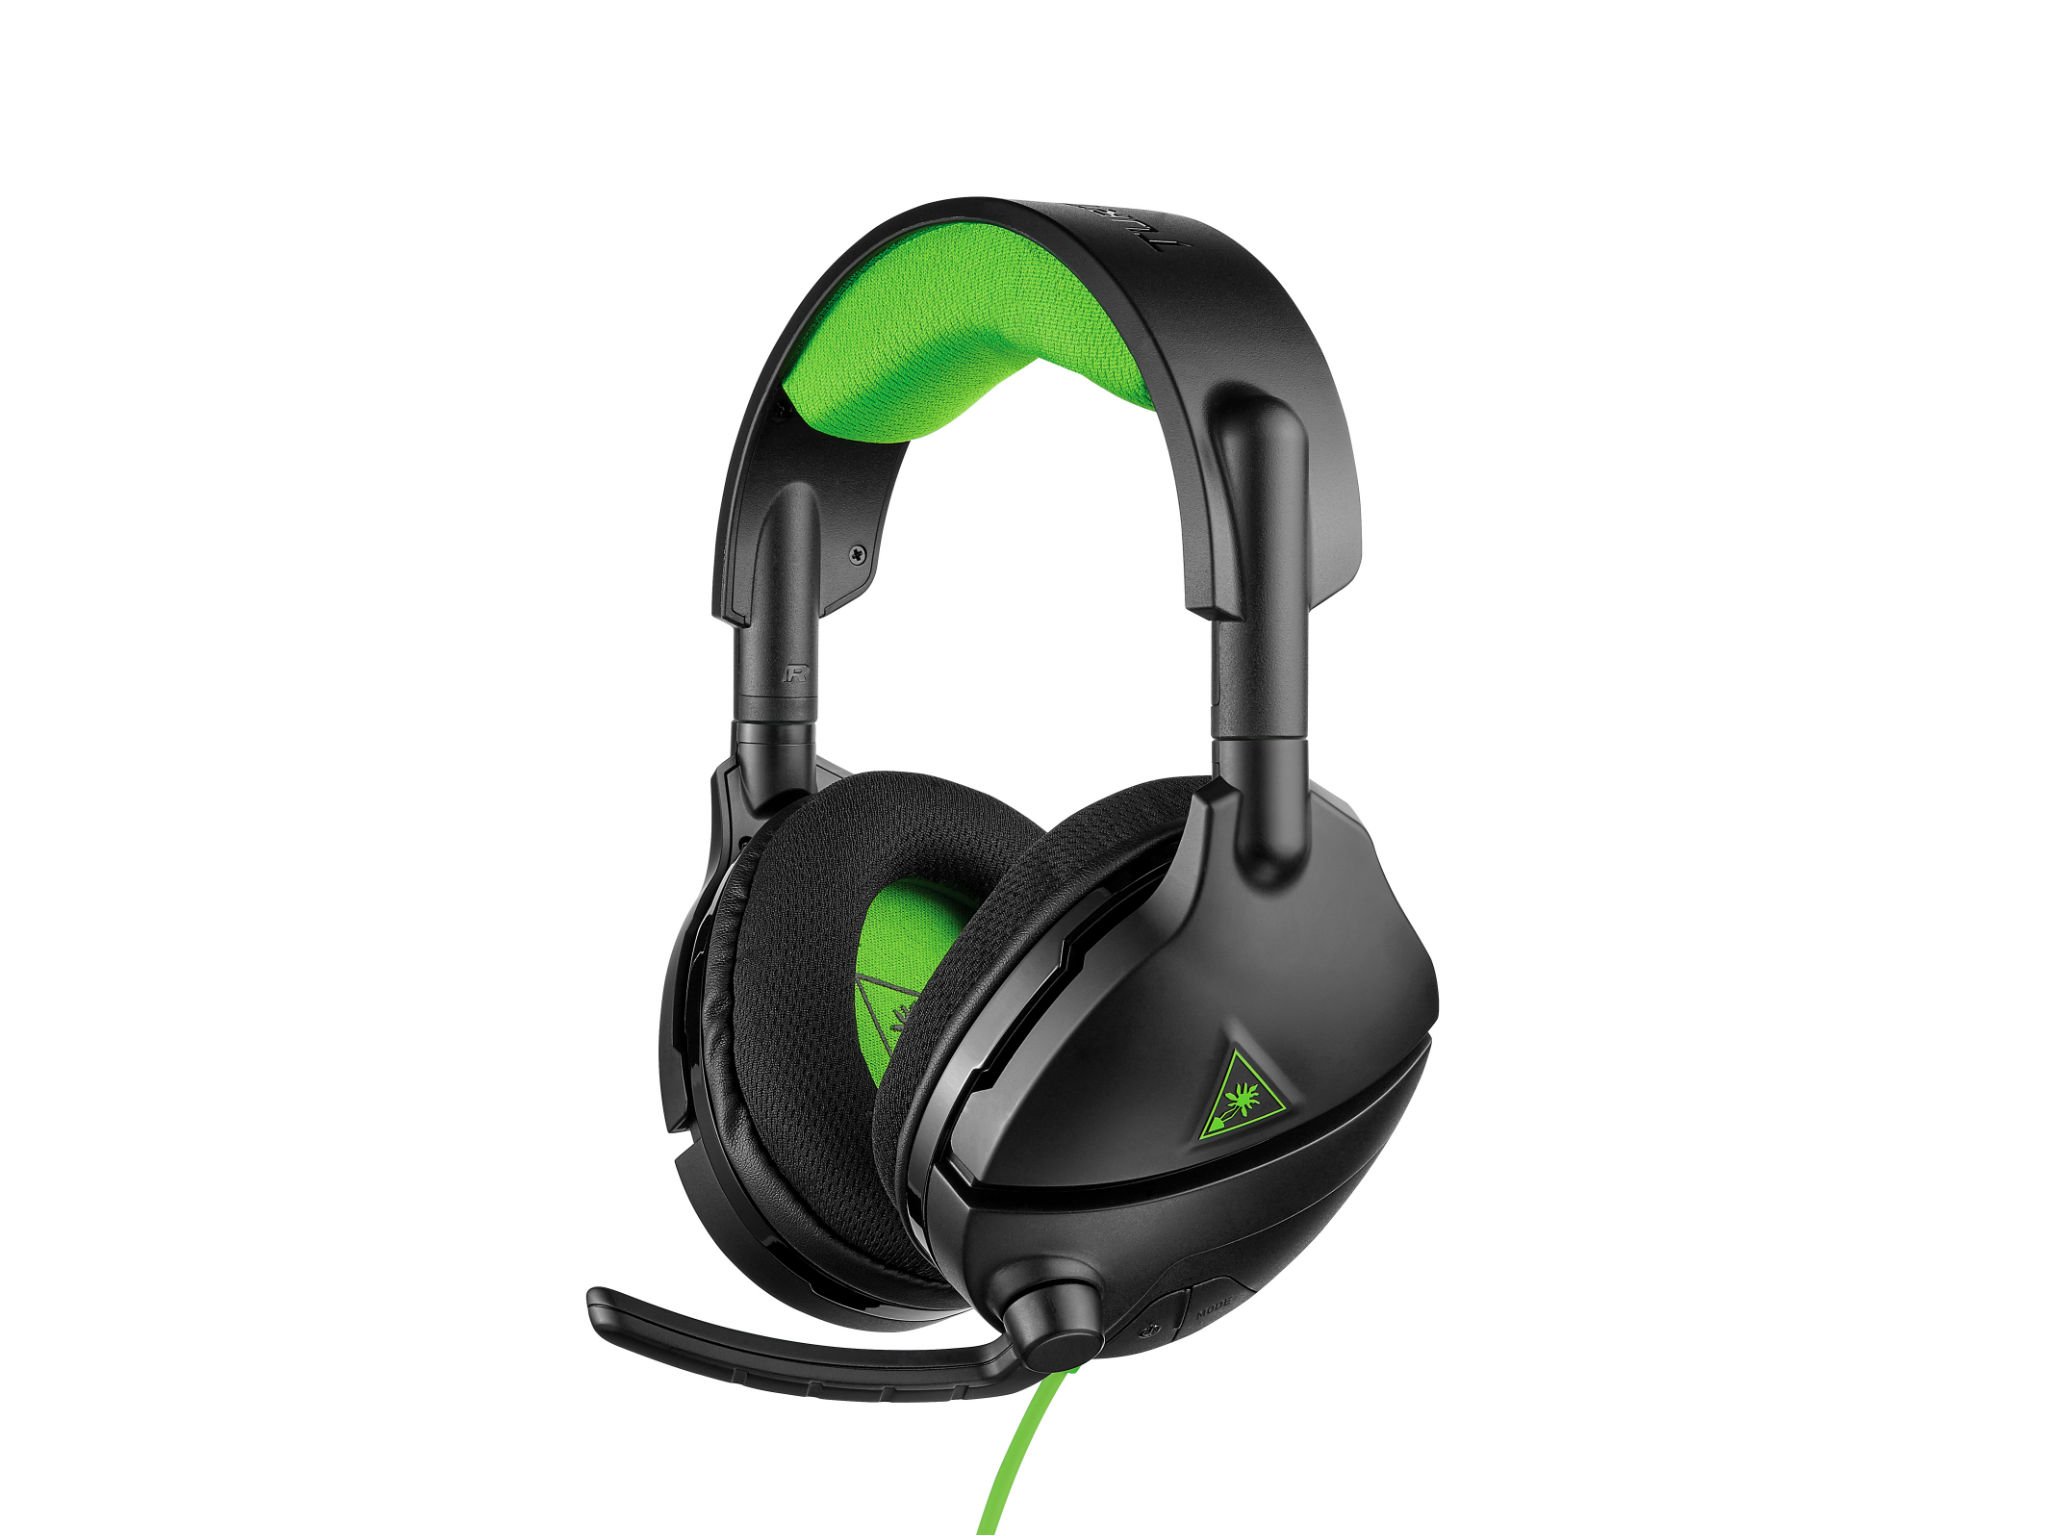 Turtle Beach introduces new Stealth 300 and Recon 200 headsets at E3 2018